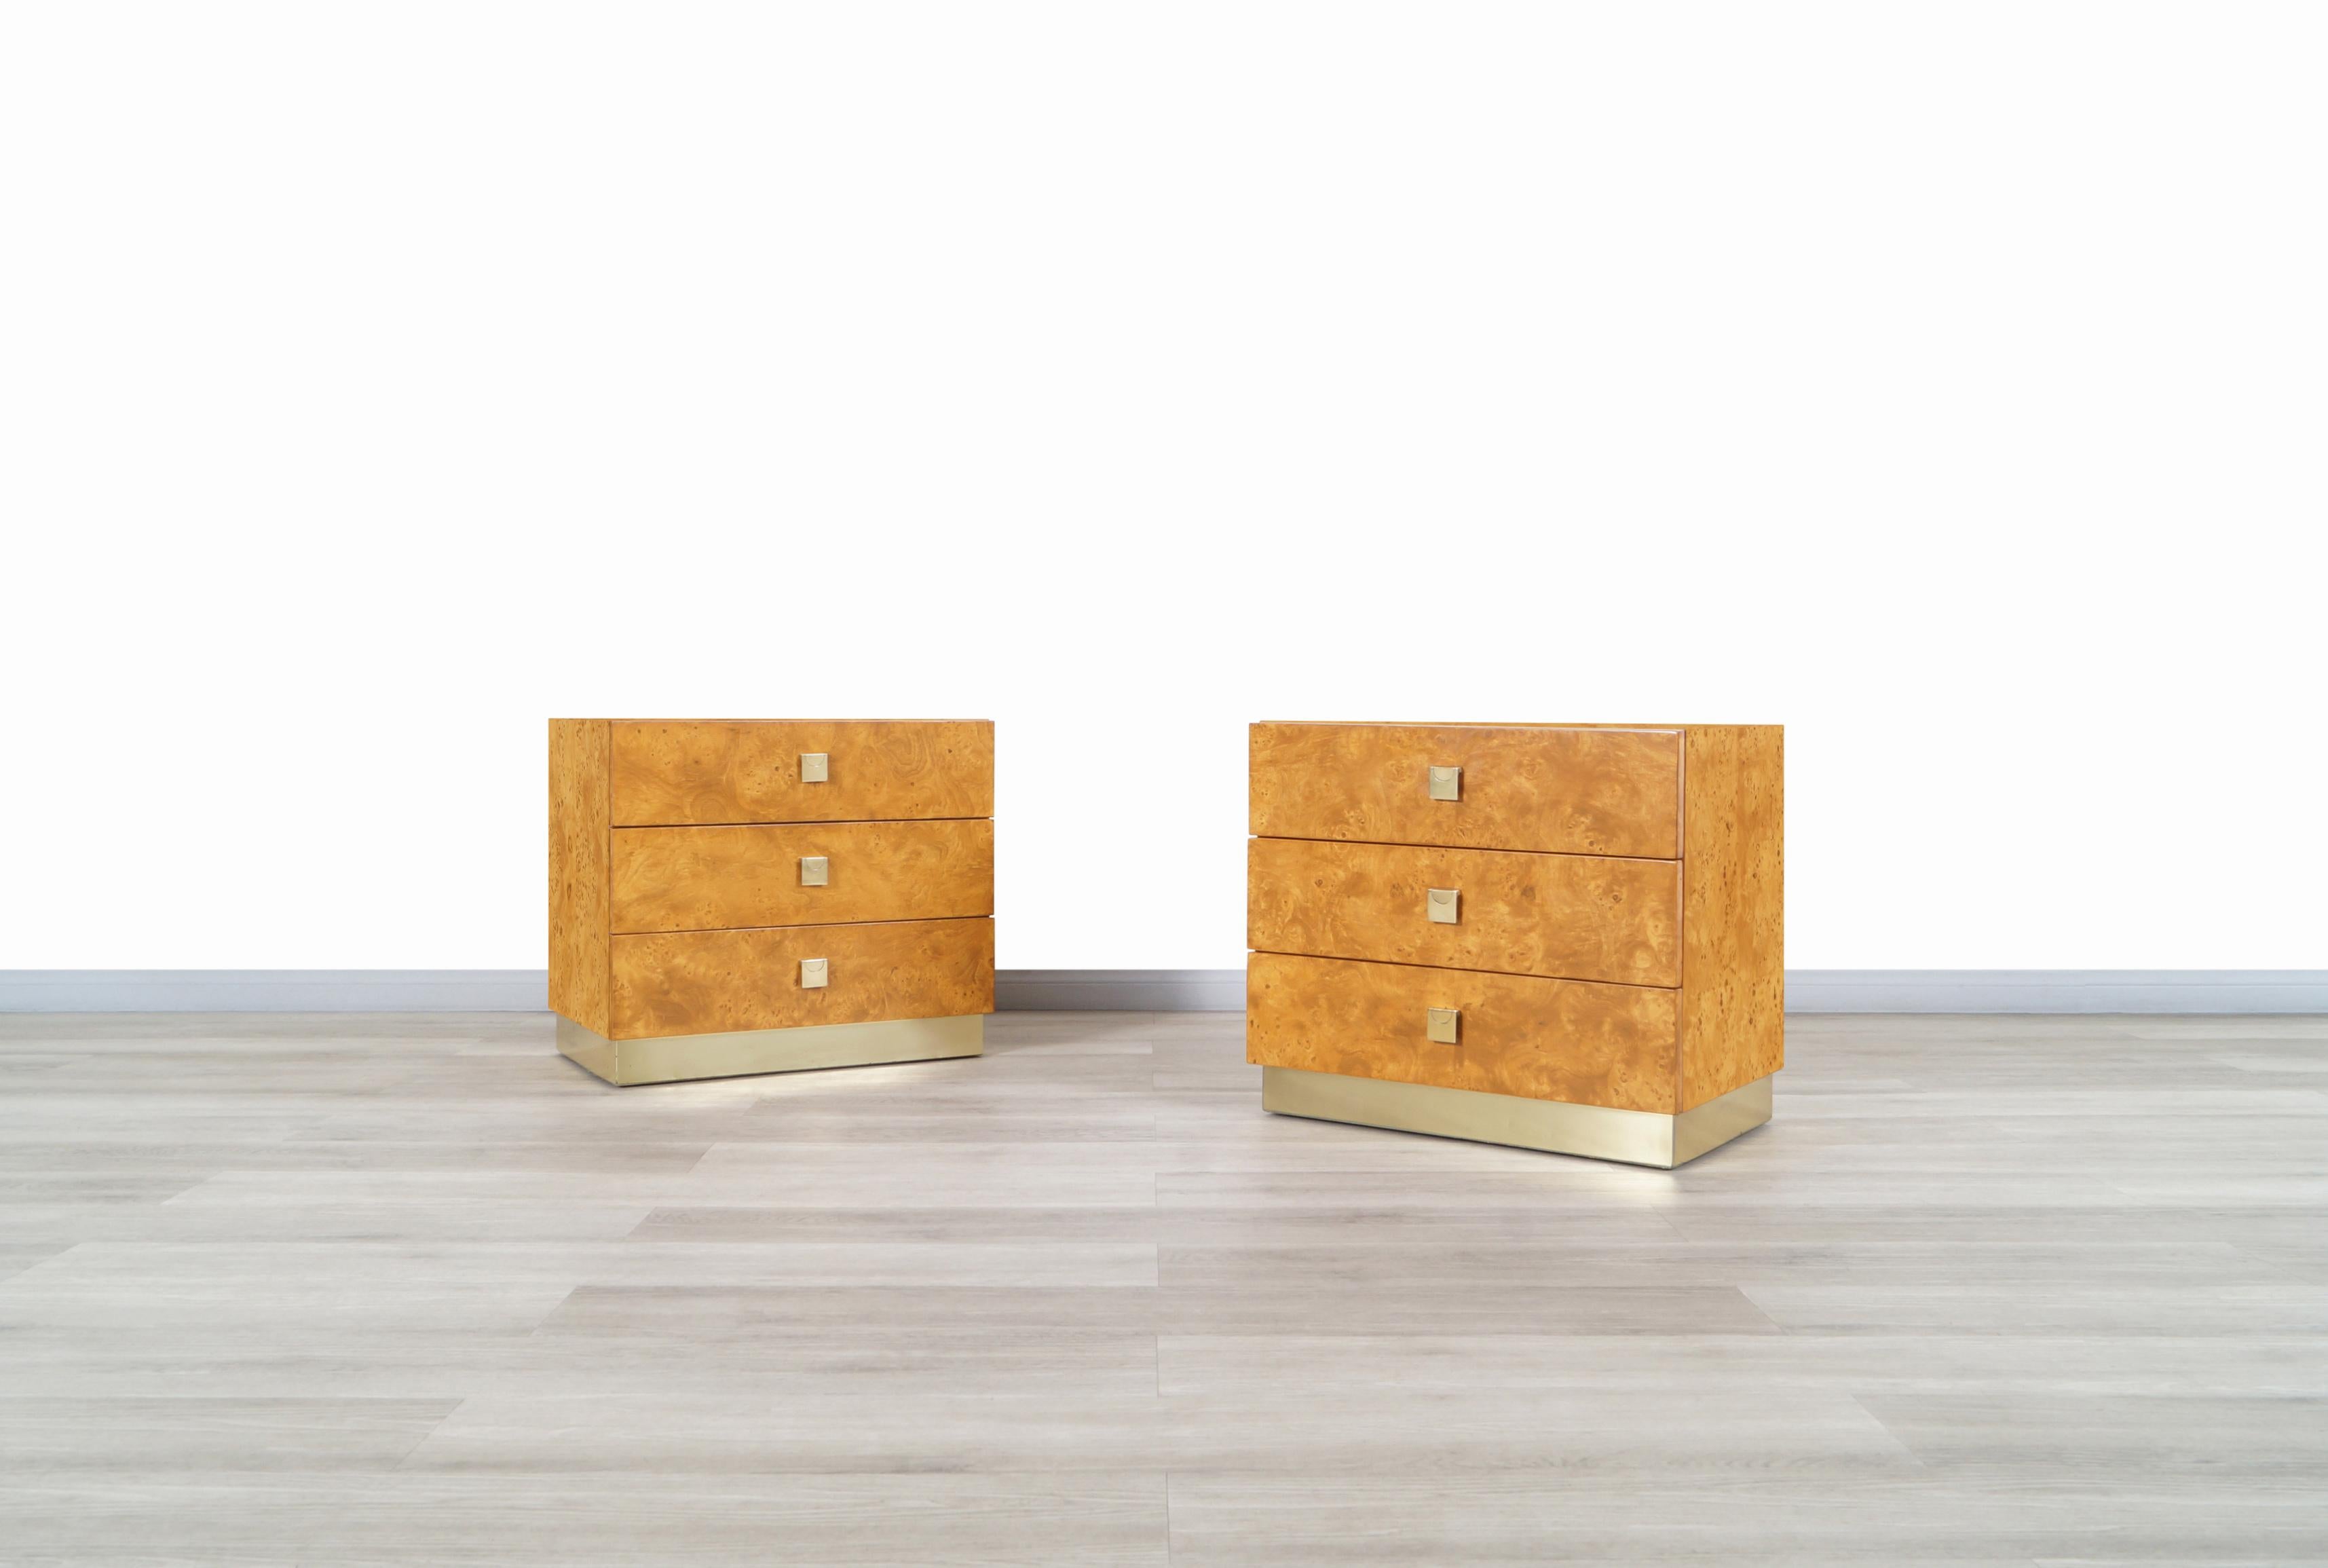 Gorgeous vintage burl wood and brass chest of drawers / nightstands manufactured by Founder in the United States, circa 1980s. This set is inspired by the iconic designs of the famous designer Milo Baughman. This collection was characterized by